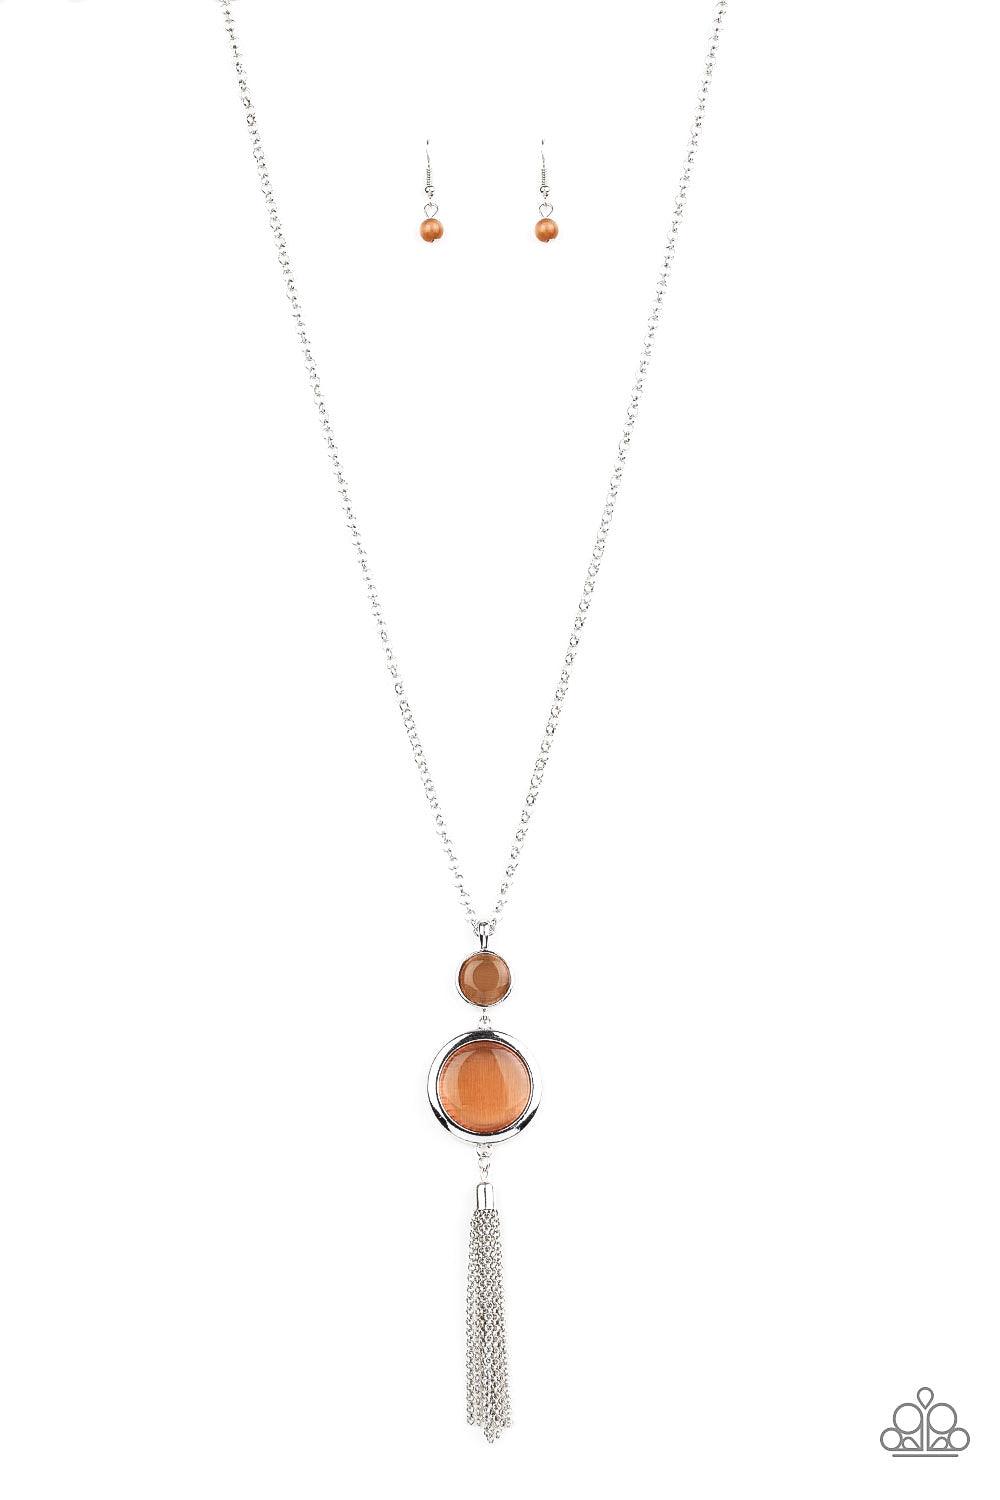 Paparazzi Accessories Have Some Common SENSE! - Orange Swinging from the bottom of a glistening silver chain, glowing stacked moonstone pendants give way to a shimmery silver tassel for a refined look. Features an adjustable clasp closure. Sold as one ind